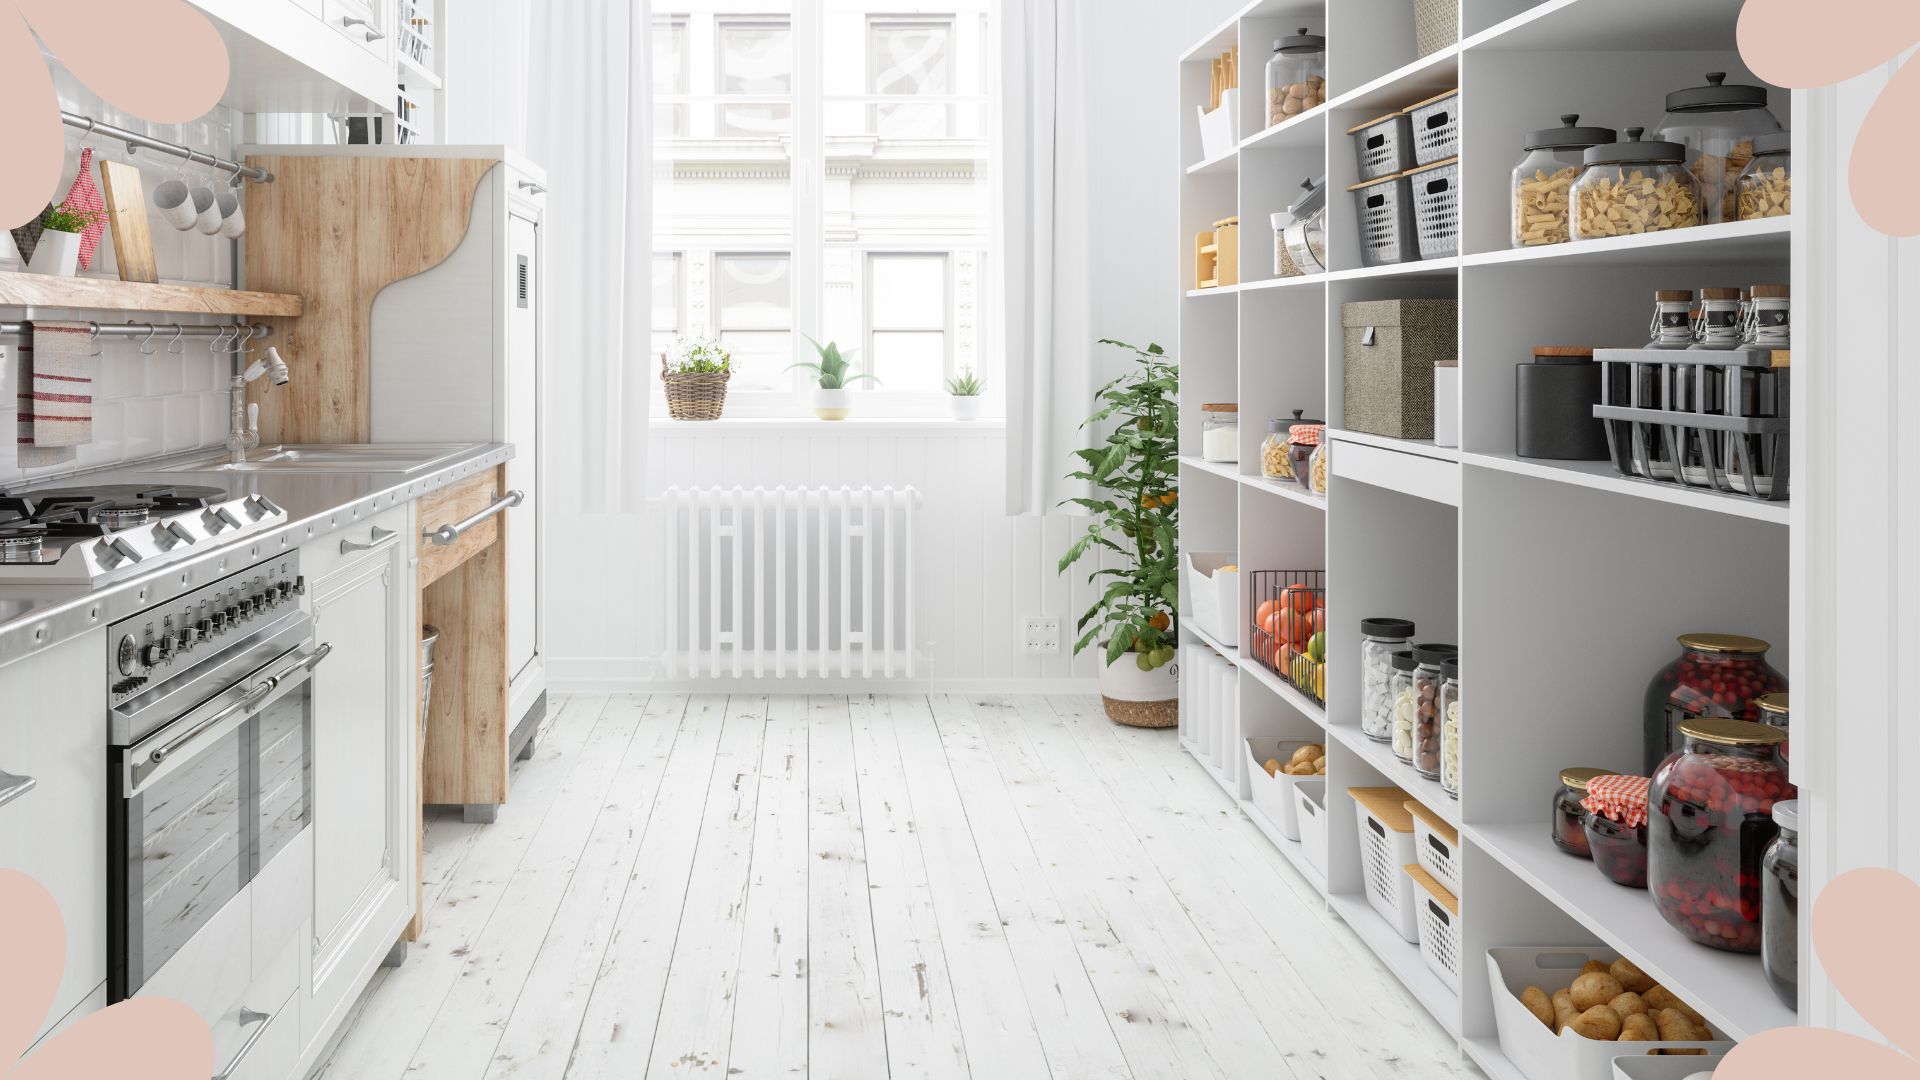 Pantry Organization Ideas: Tips For How TO Organize Your Pantry